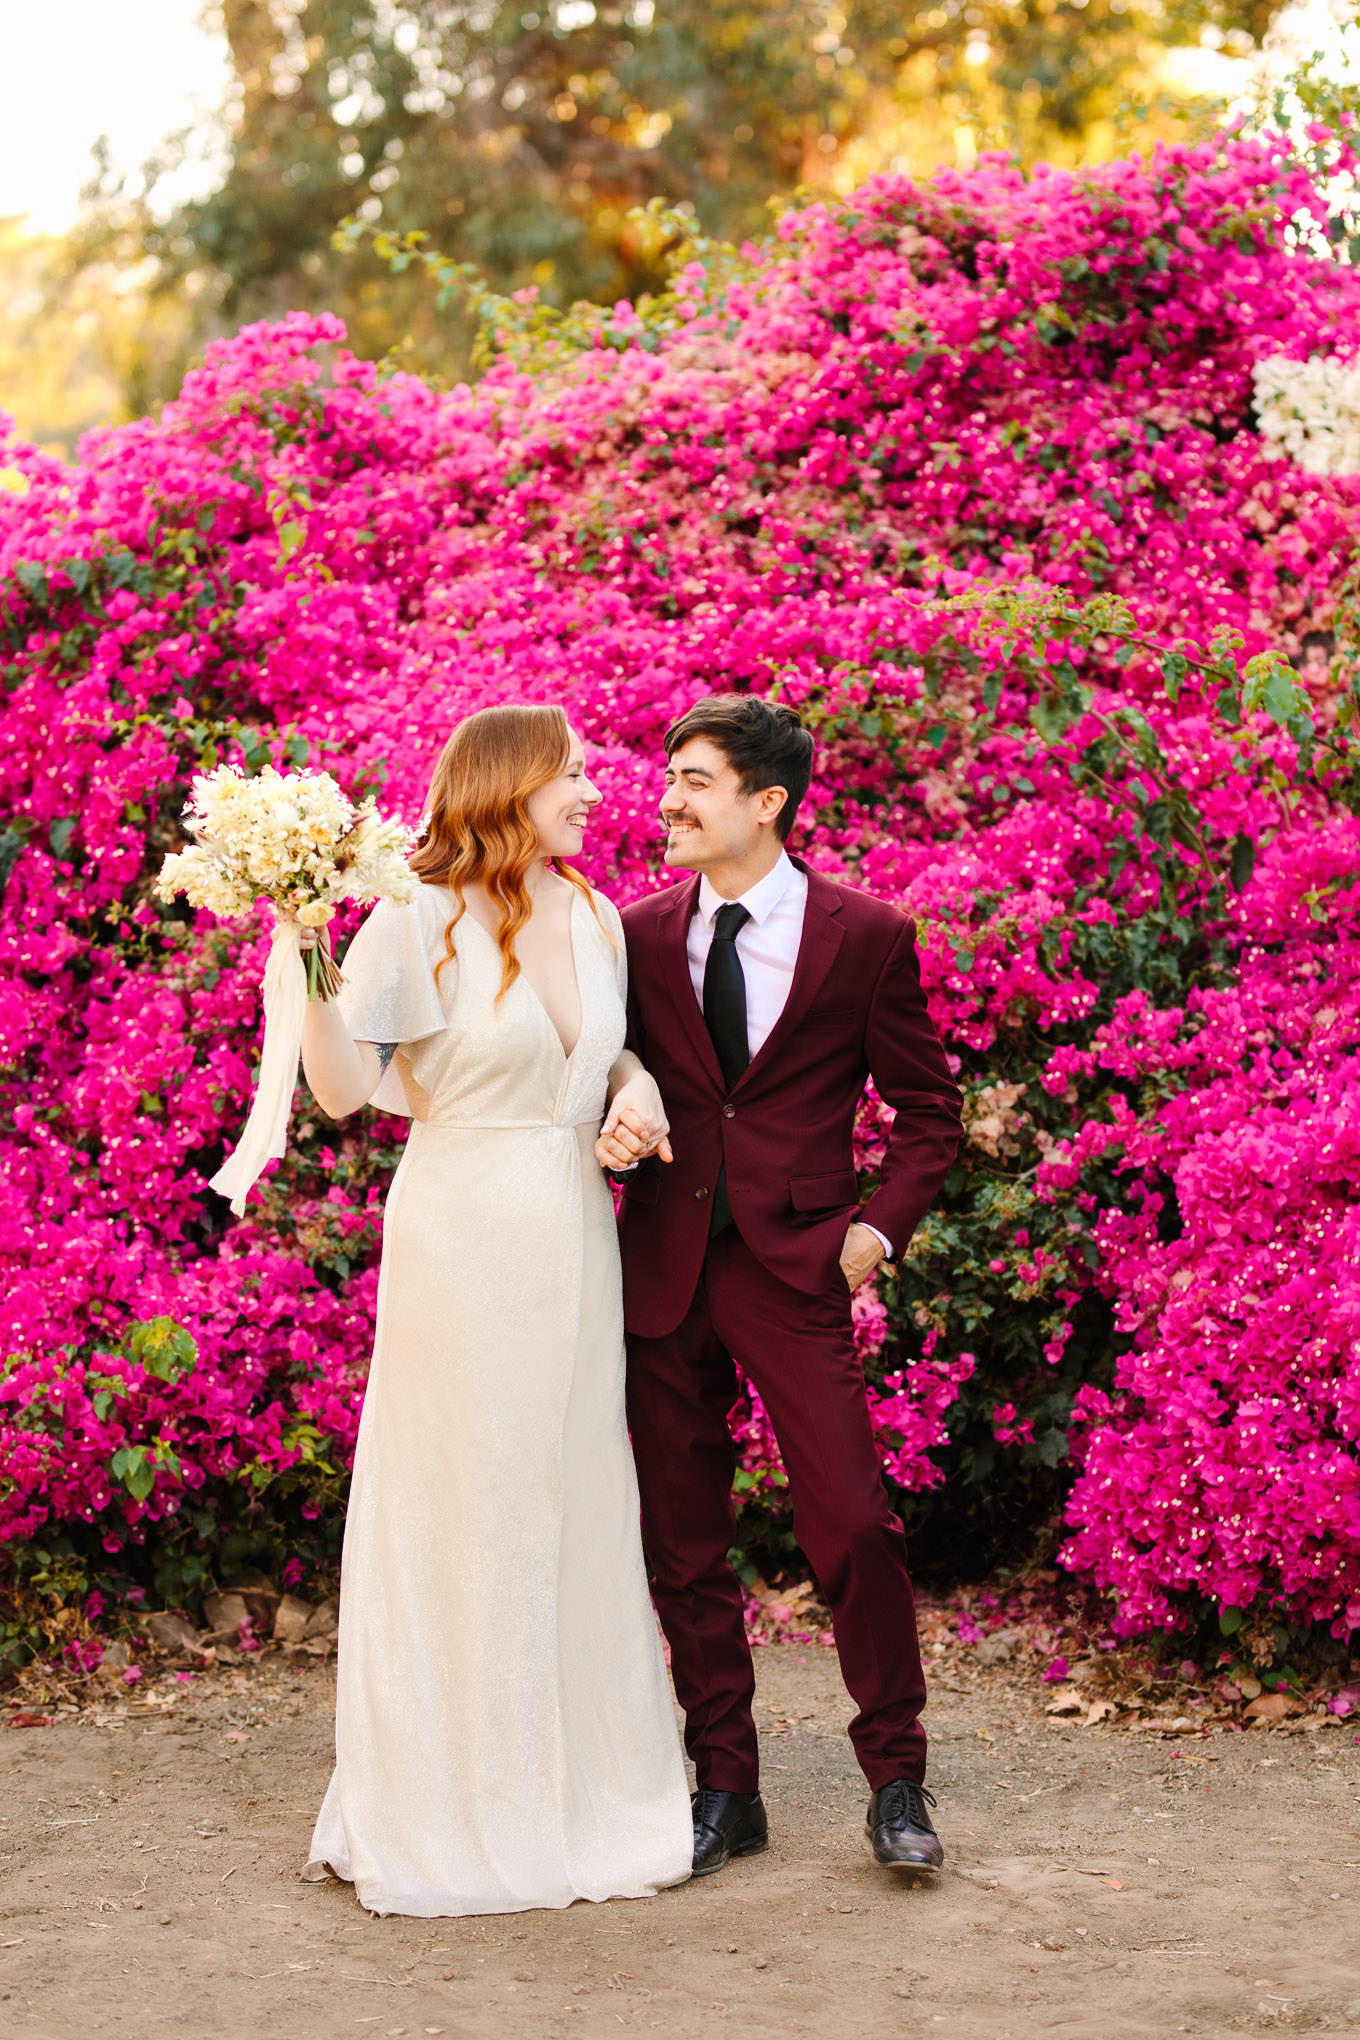 Joyful couple in front of lush bougainvillea | Los Angeles Arboretum Elopement | Colorful and elevated wedding photography for fun-loving couples in Southern California | #LosAngelesElopement #elopement #LAarboretum #LAskyline #elopementphotos   Source: Mary Costa Photography | Los Angeles